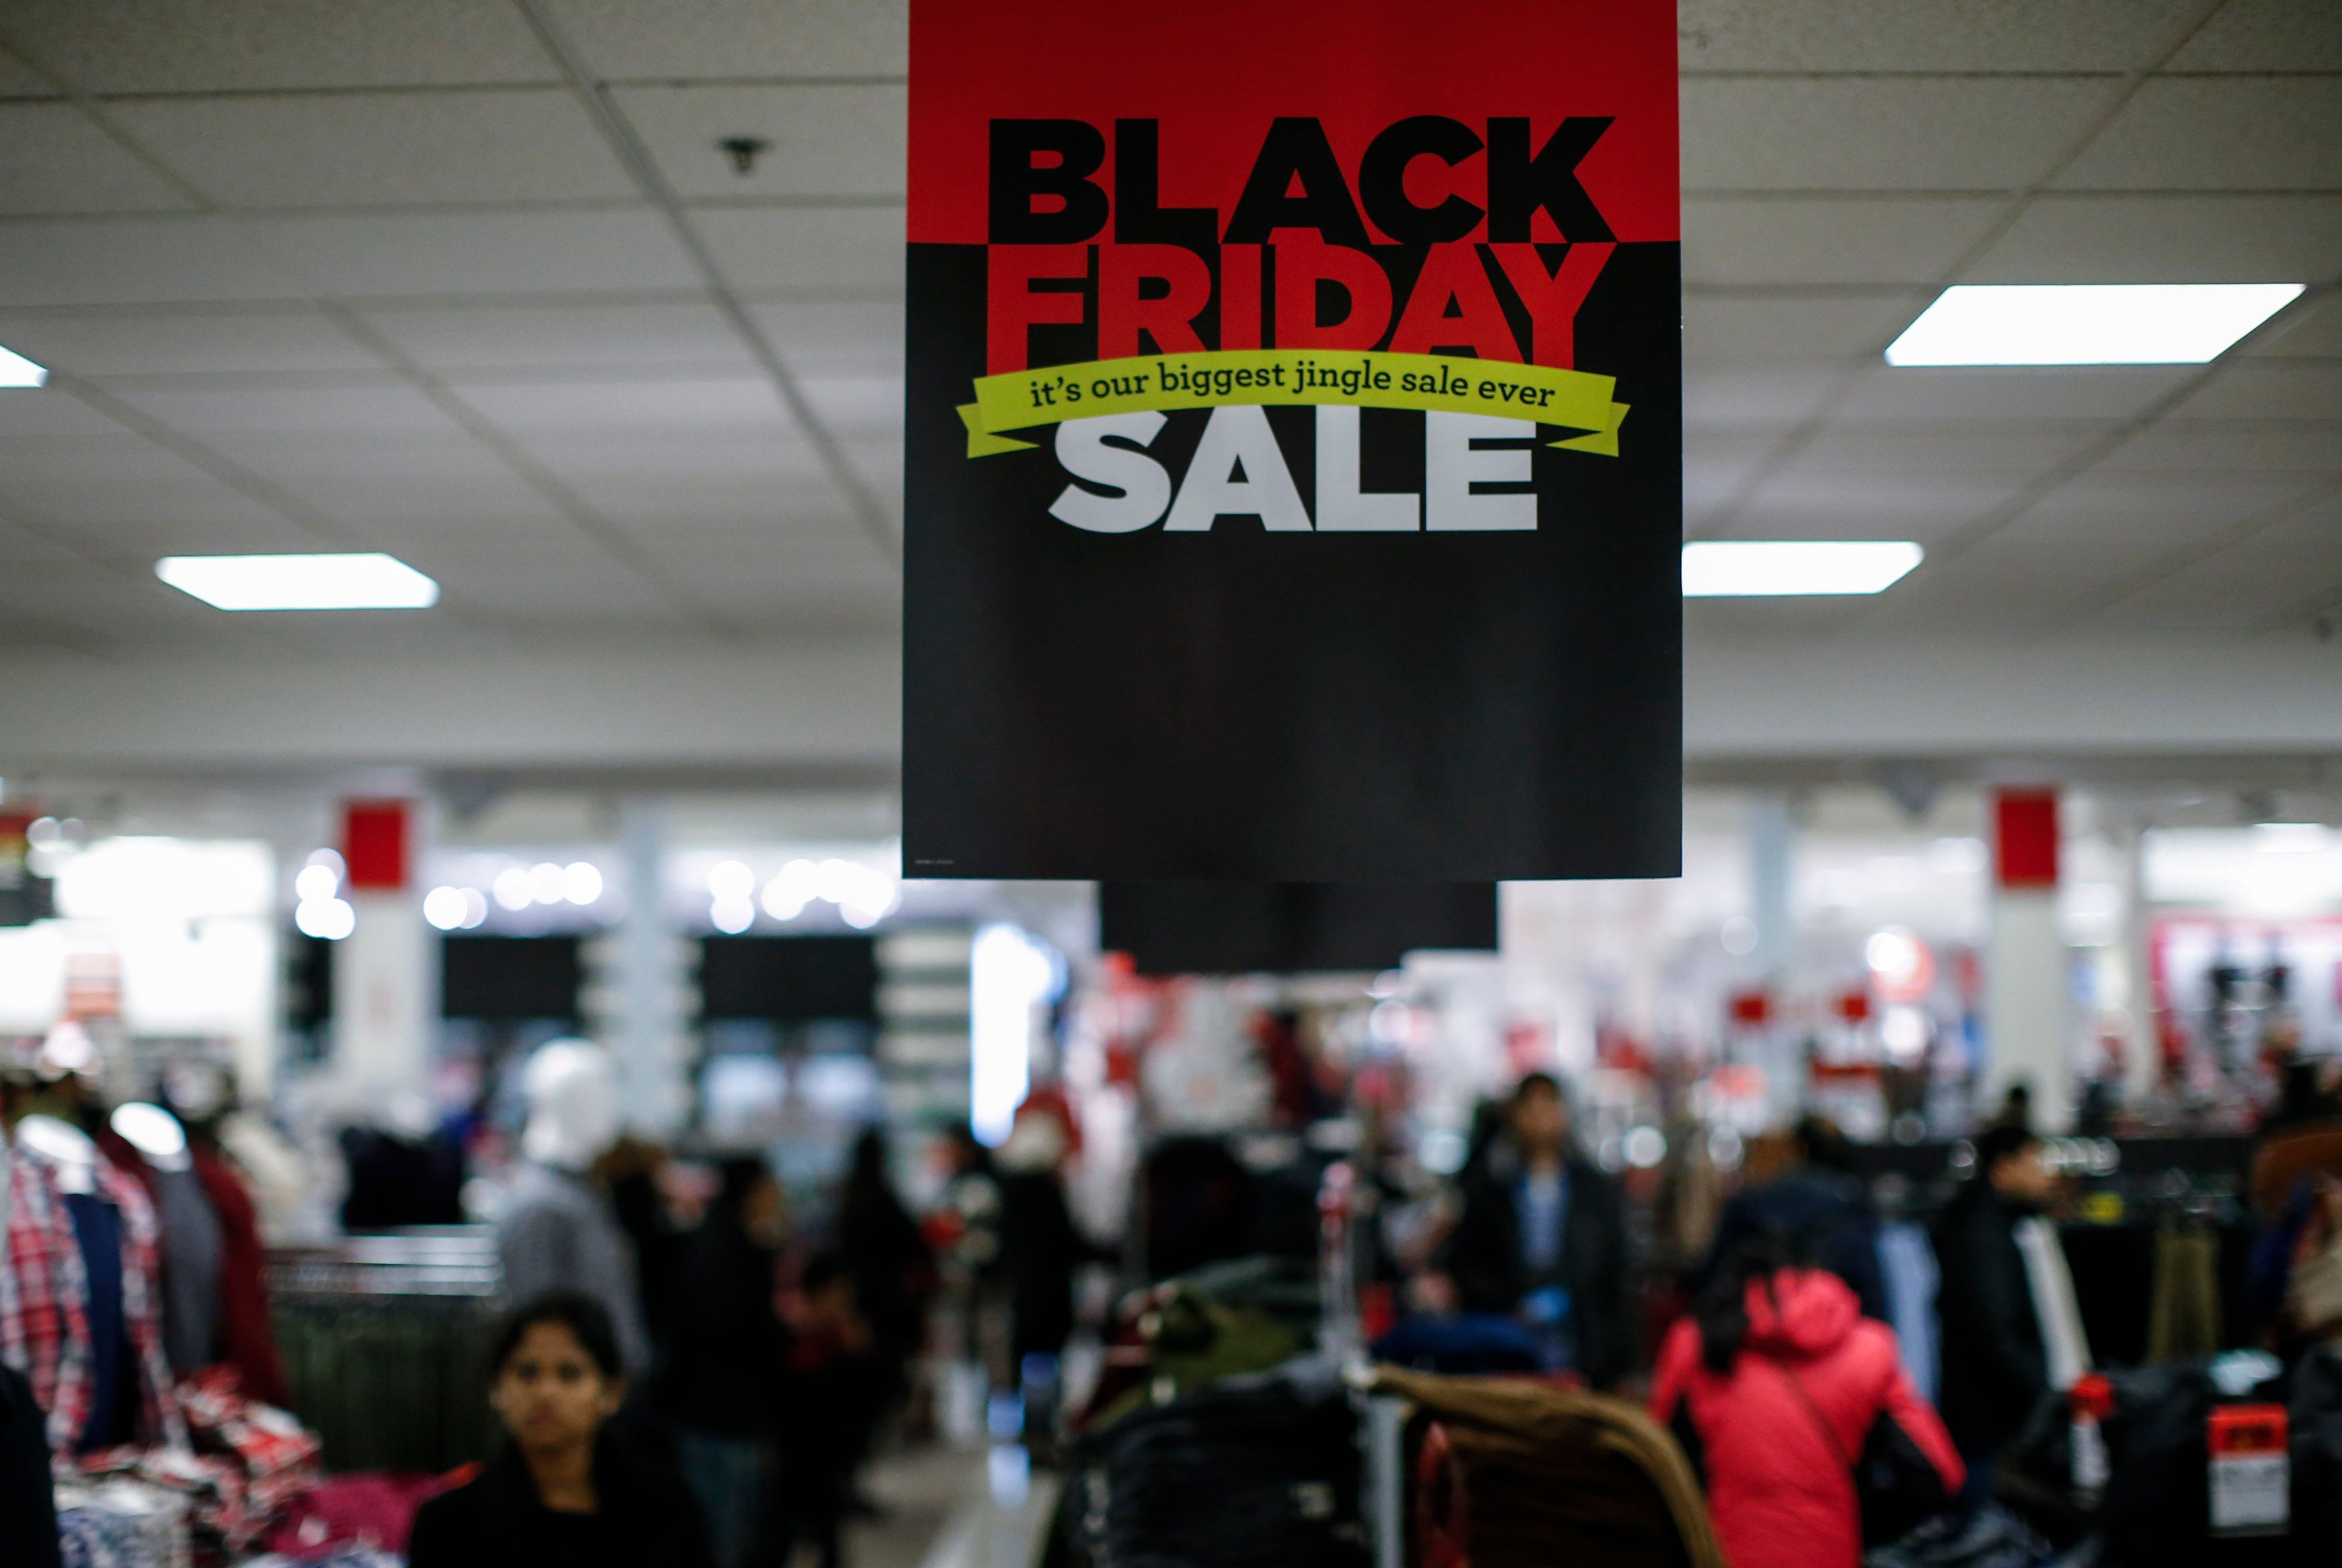 NEWPORT, NJ - NOVEMBER 27: People shop at the JCPenney store at the Newport Mall on November 27, 2014 in Jersey City, New Jersey. Black Friday sales, which now begin on the Thursday of Thanksgiving, continue to draw shoppers out for deals and sales. (Photo by Kena Betancur/Getty Images)